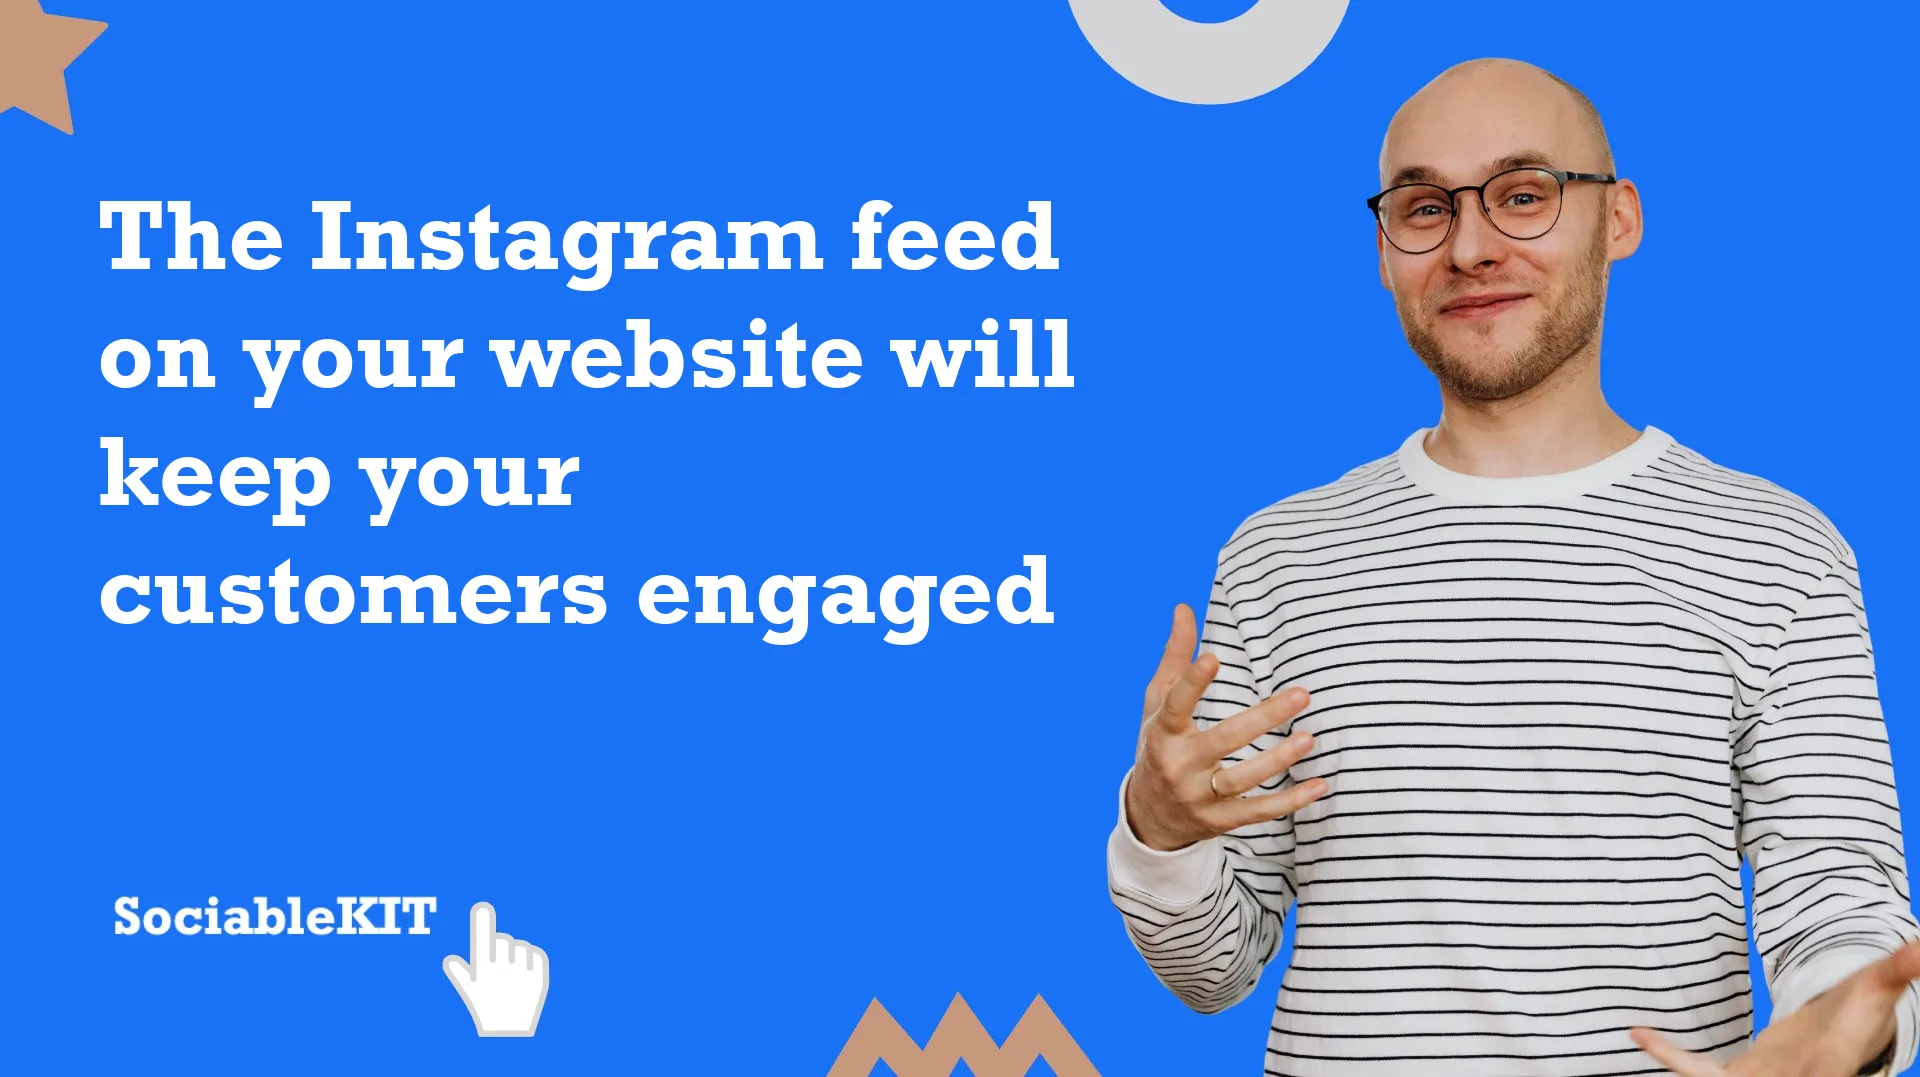 The Instagram feed on your website will keep your customers engaged